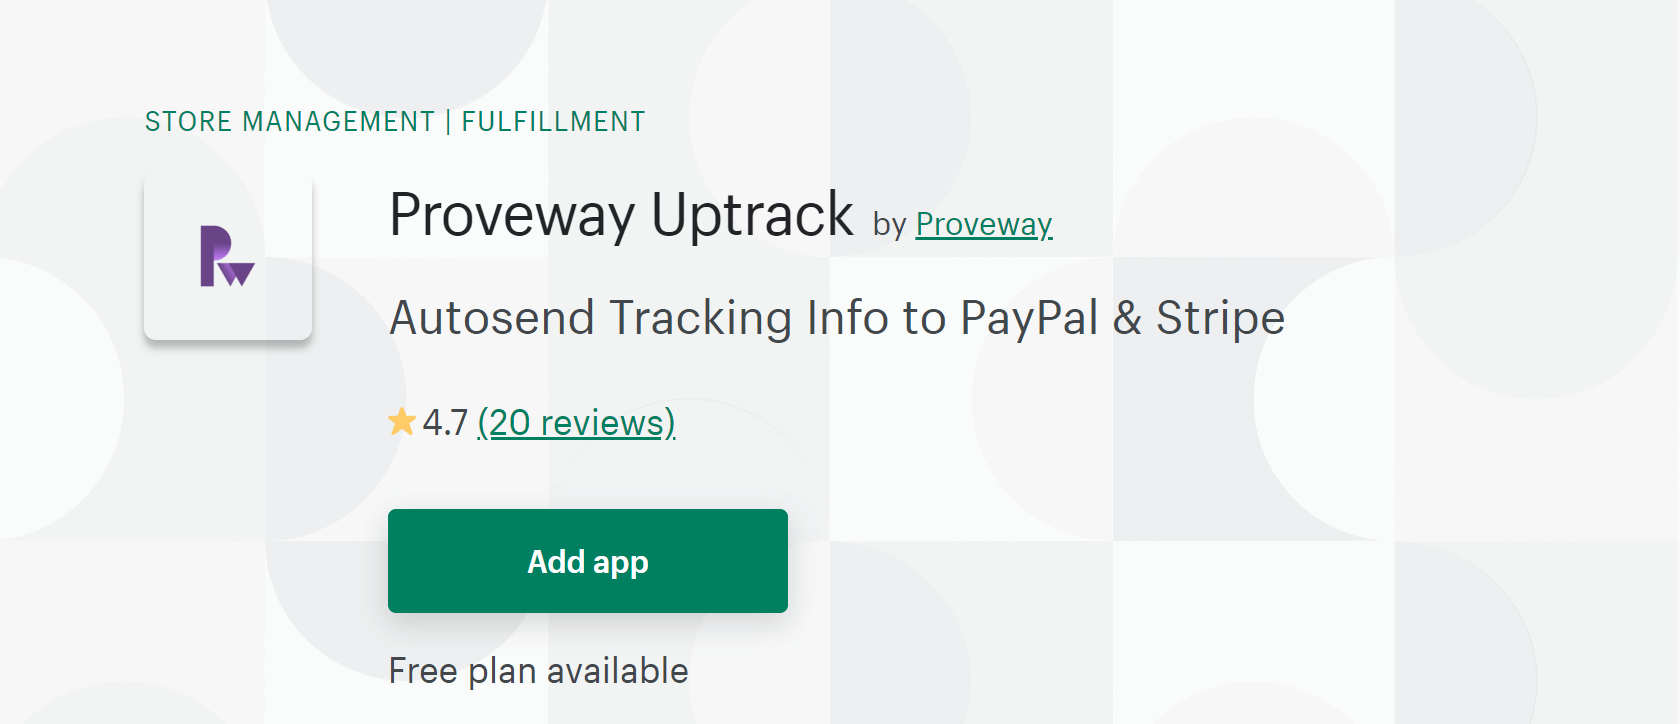 Sync tracking info to PayPal - uptrack